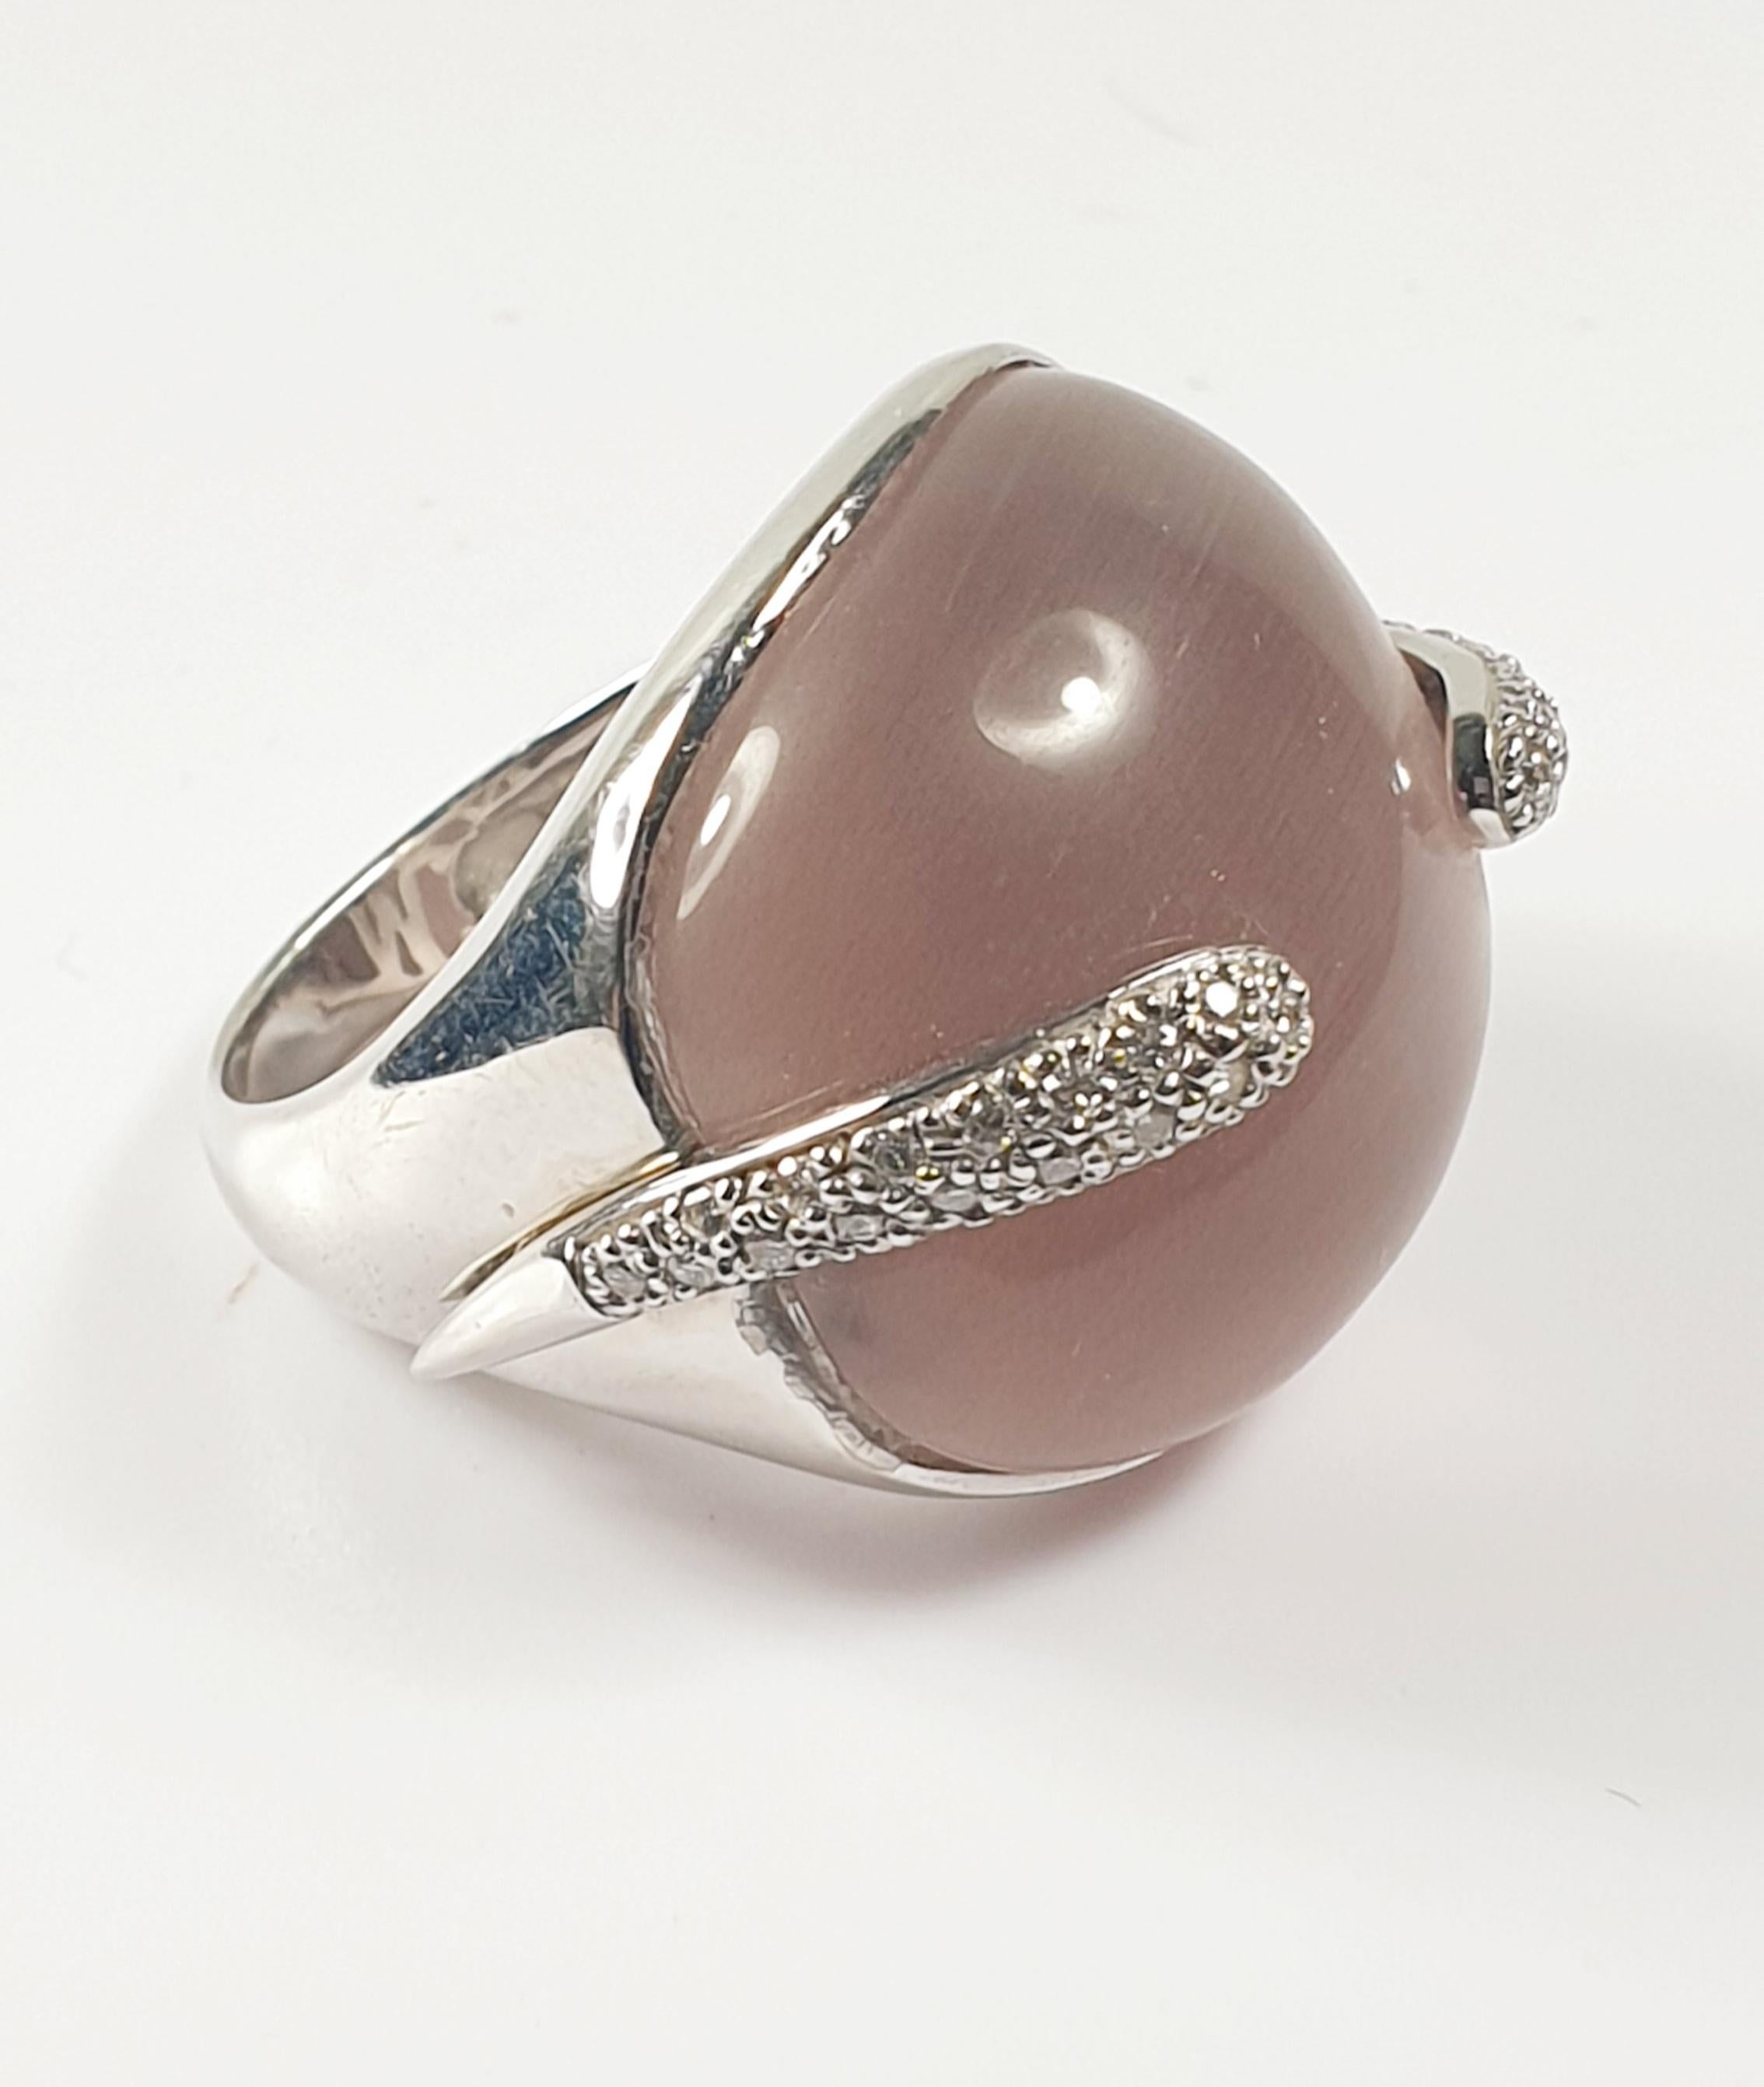 Beuatiful Pink Moonstone.... romantic and chic in 18k gold and diamonds 
Modern and powerful for a sensual and strong feel. 
READY TO SHIP
*Shipment of this piece is not affected by COVID-19. Orders welcome!

MATERIAL
◘ Weight gold 15,1 grams 
◘